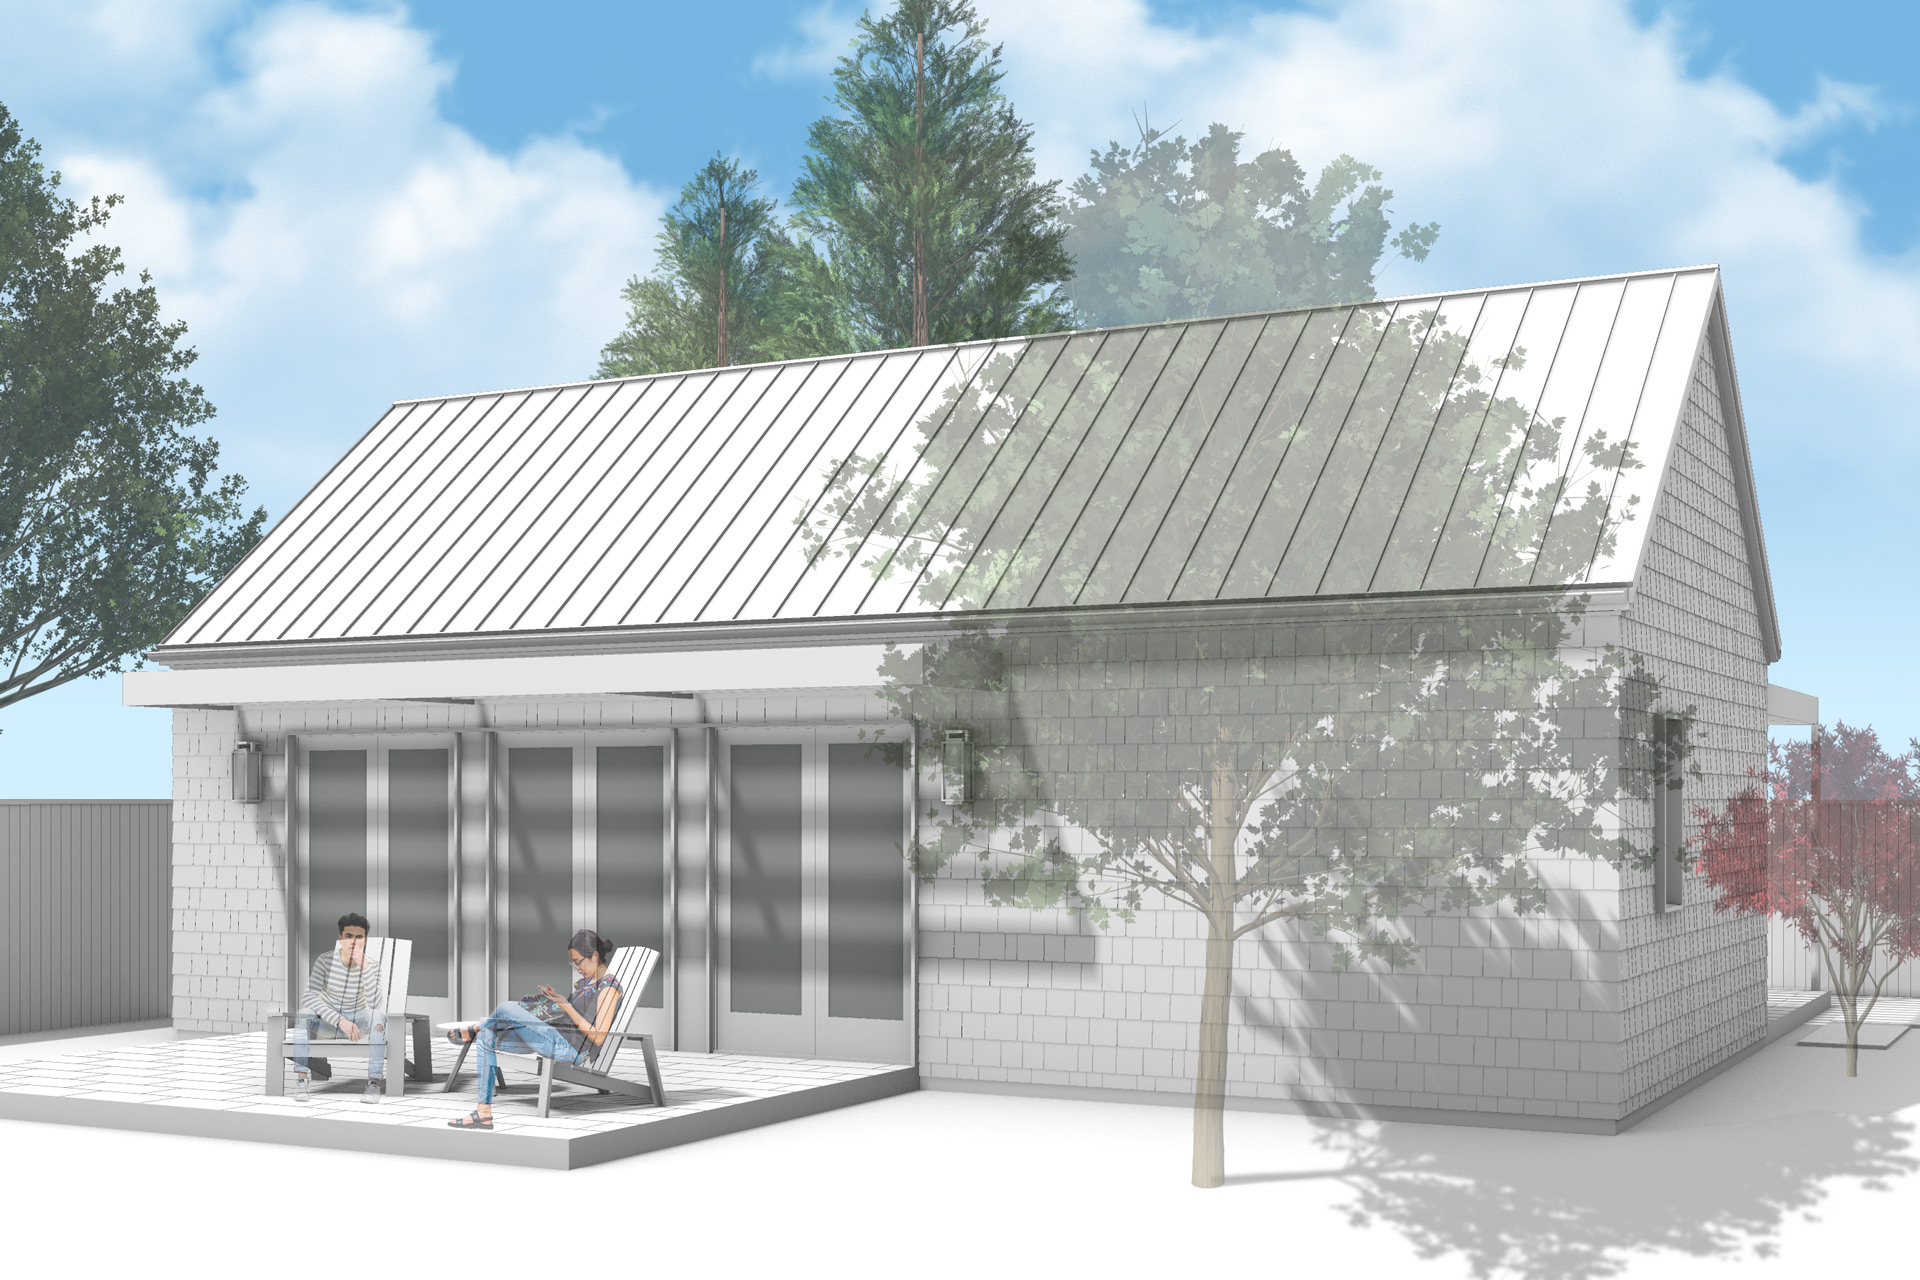 Architectural rendering of the rear of the accessory dwelling unit showing the patio.